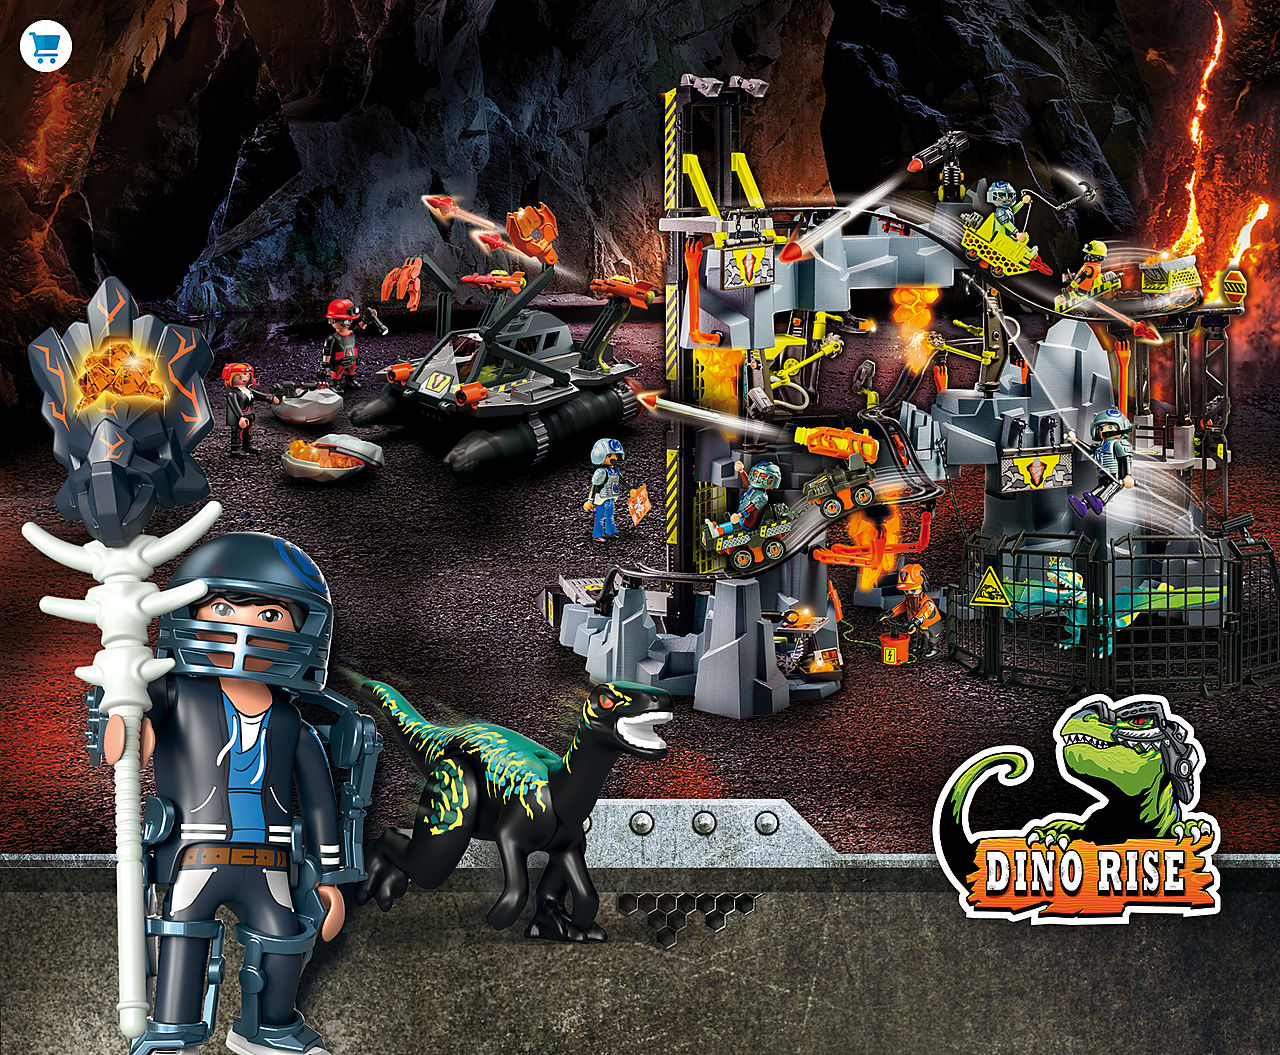 Discover the new Dino Rise playsets like 70925 Dino Mine